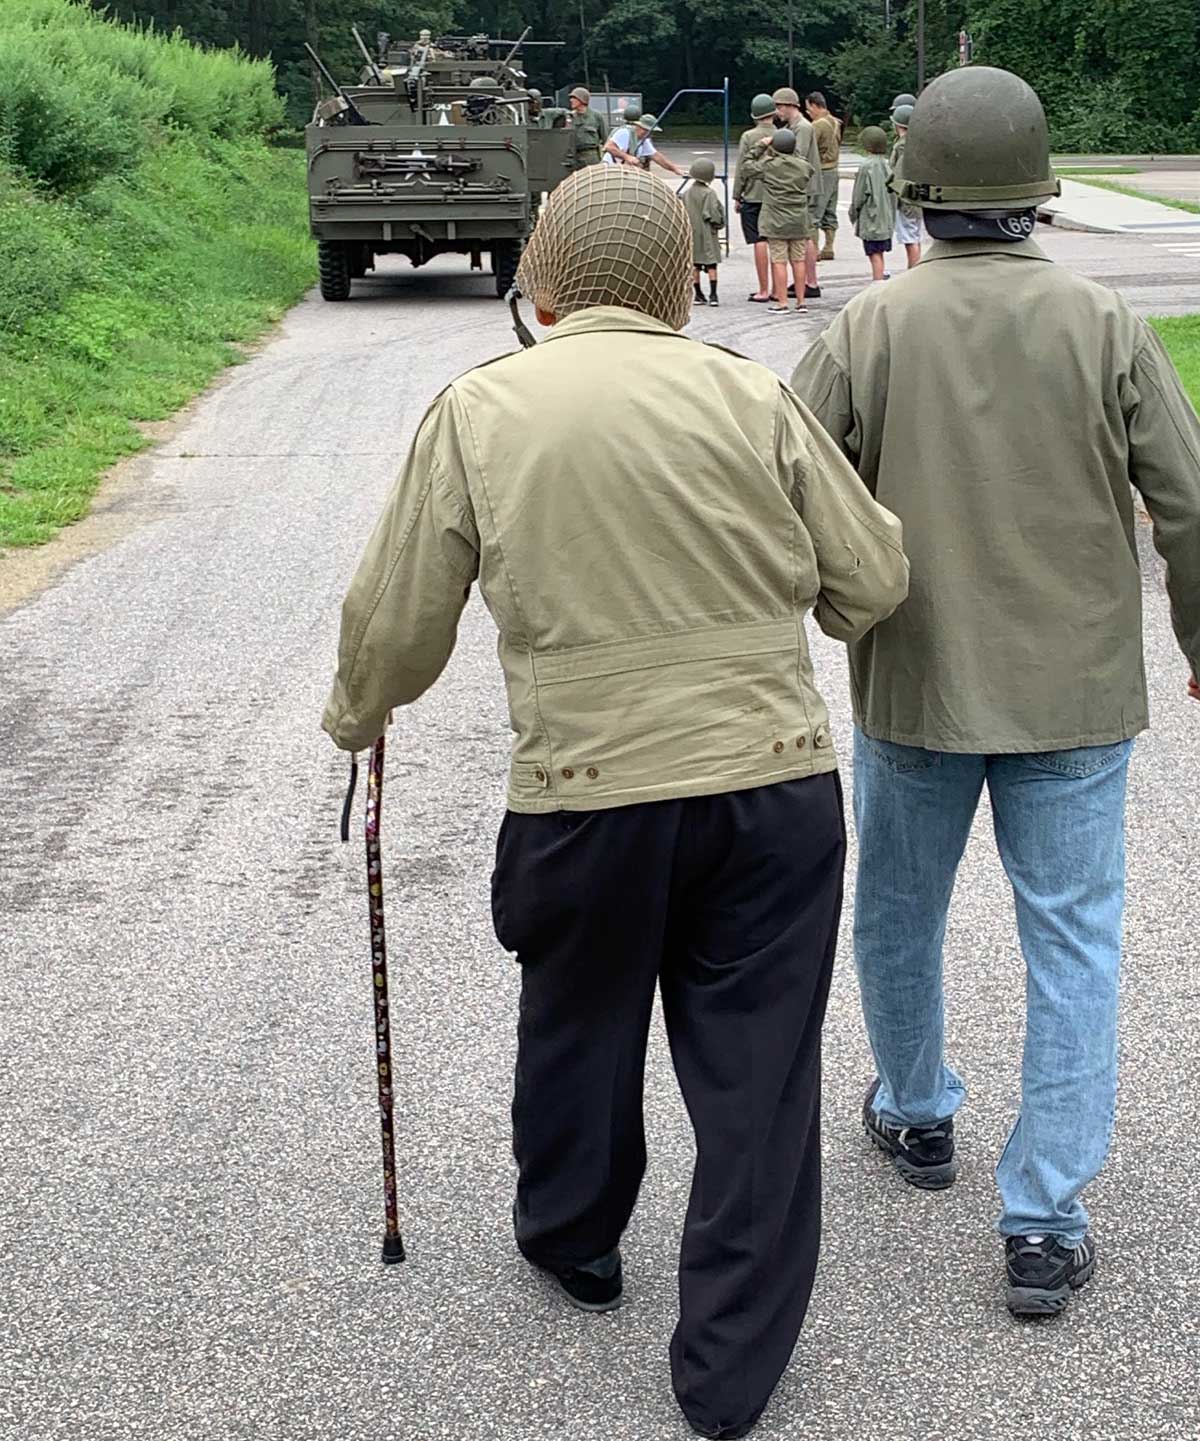 Long Island veterans walking towards military vehicle with families around